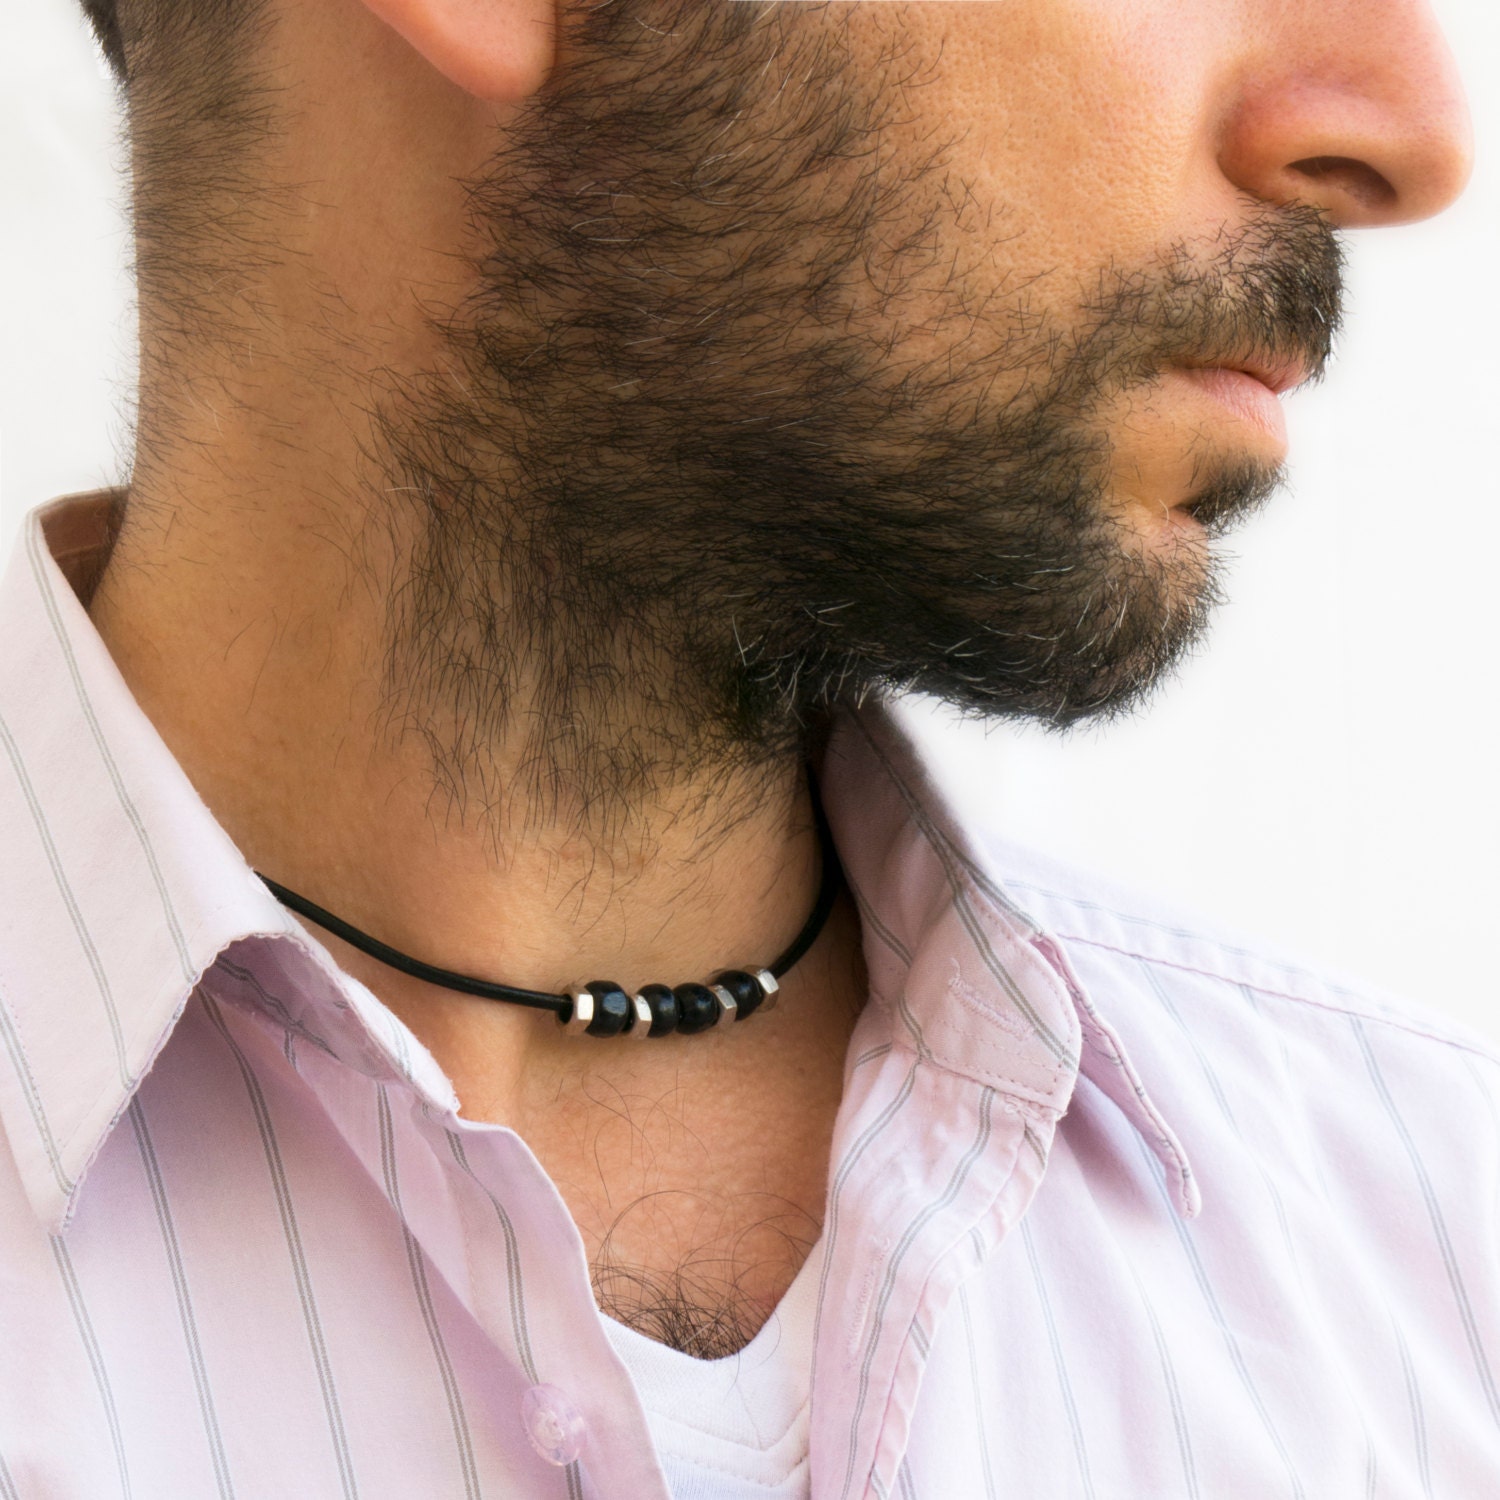 Classic Men's Leather Necklace Choker | Collar de cuero para hombre, Collar  hombre, Collar de cuero